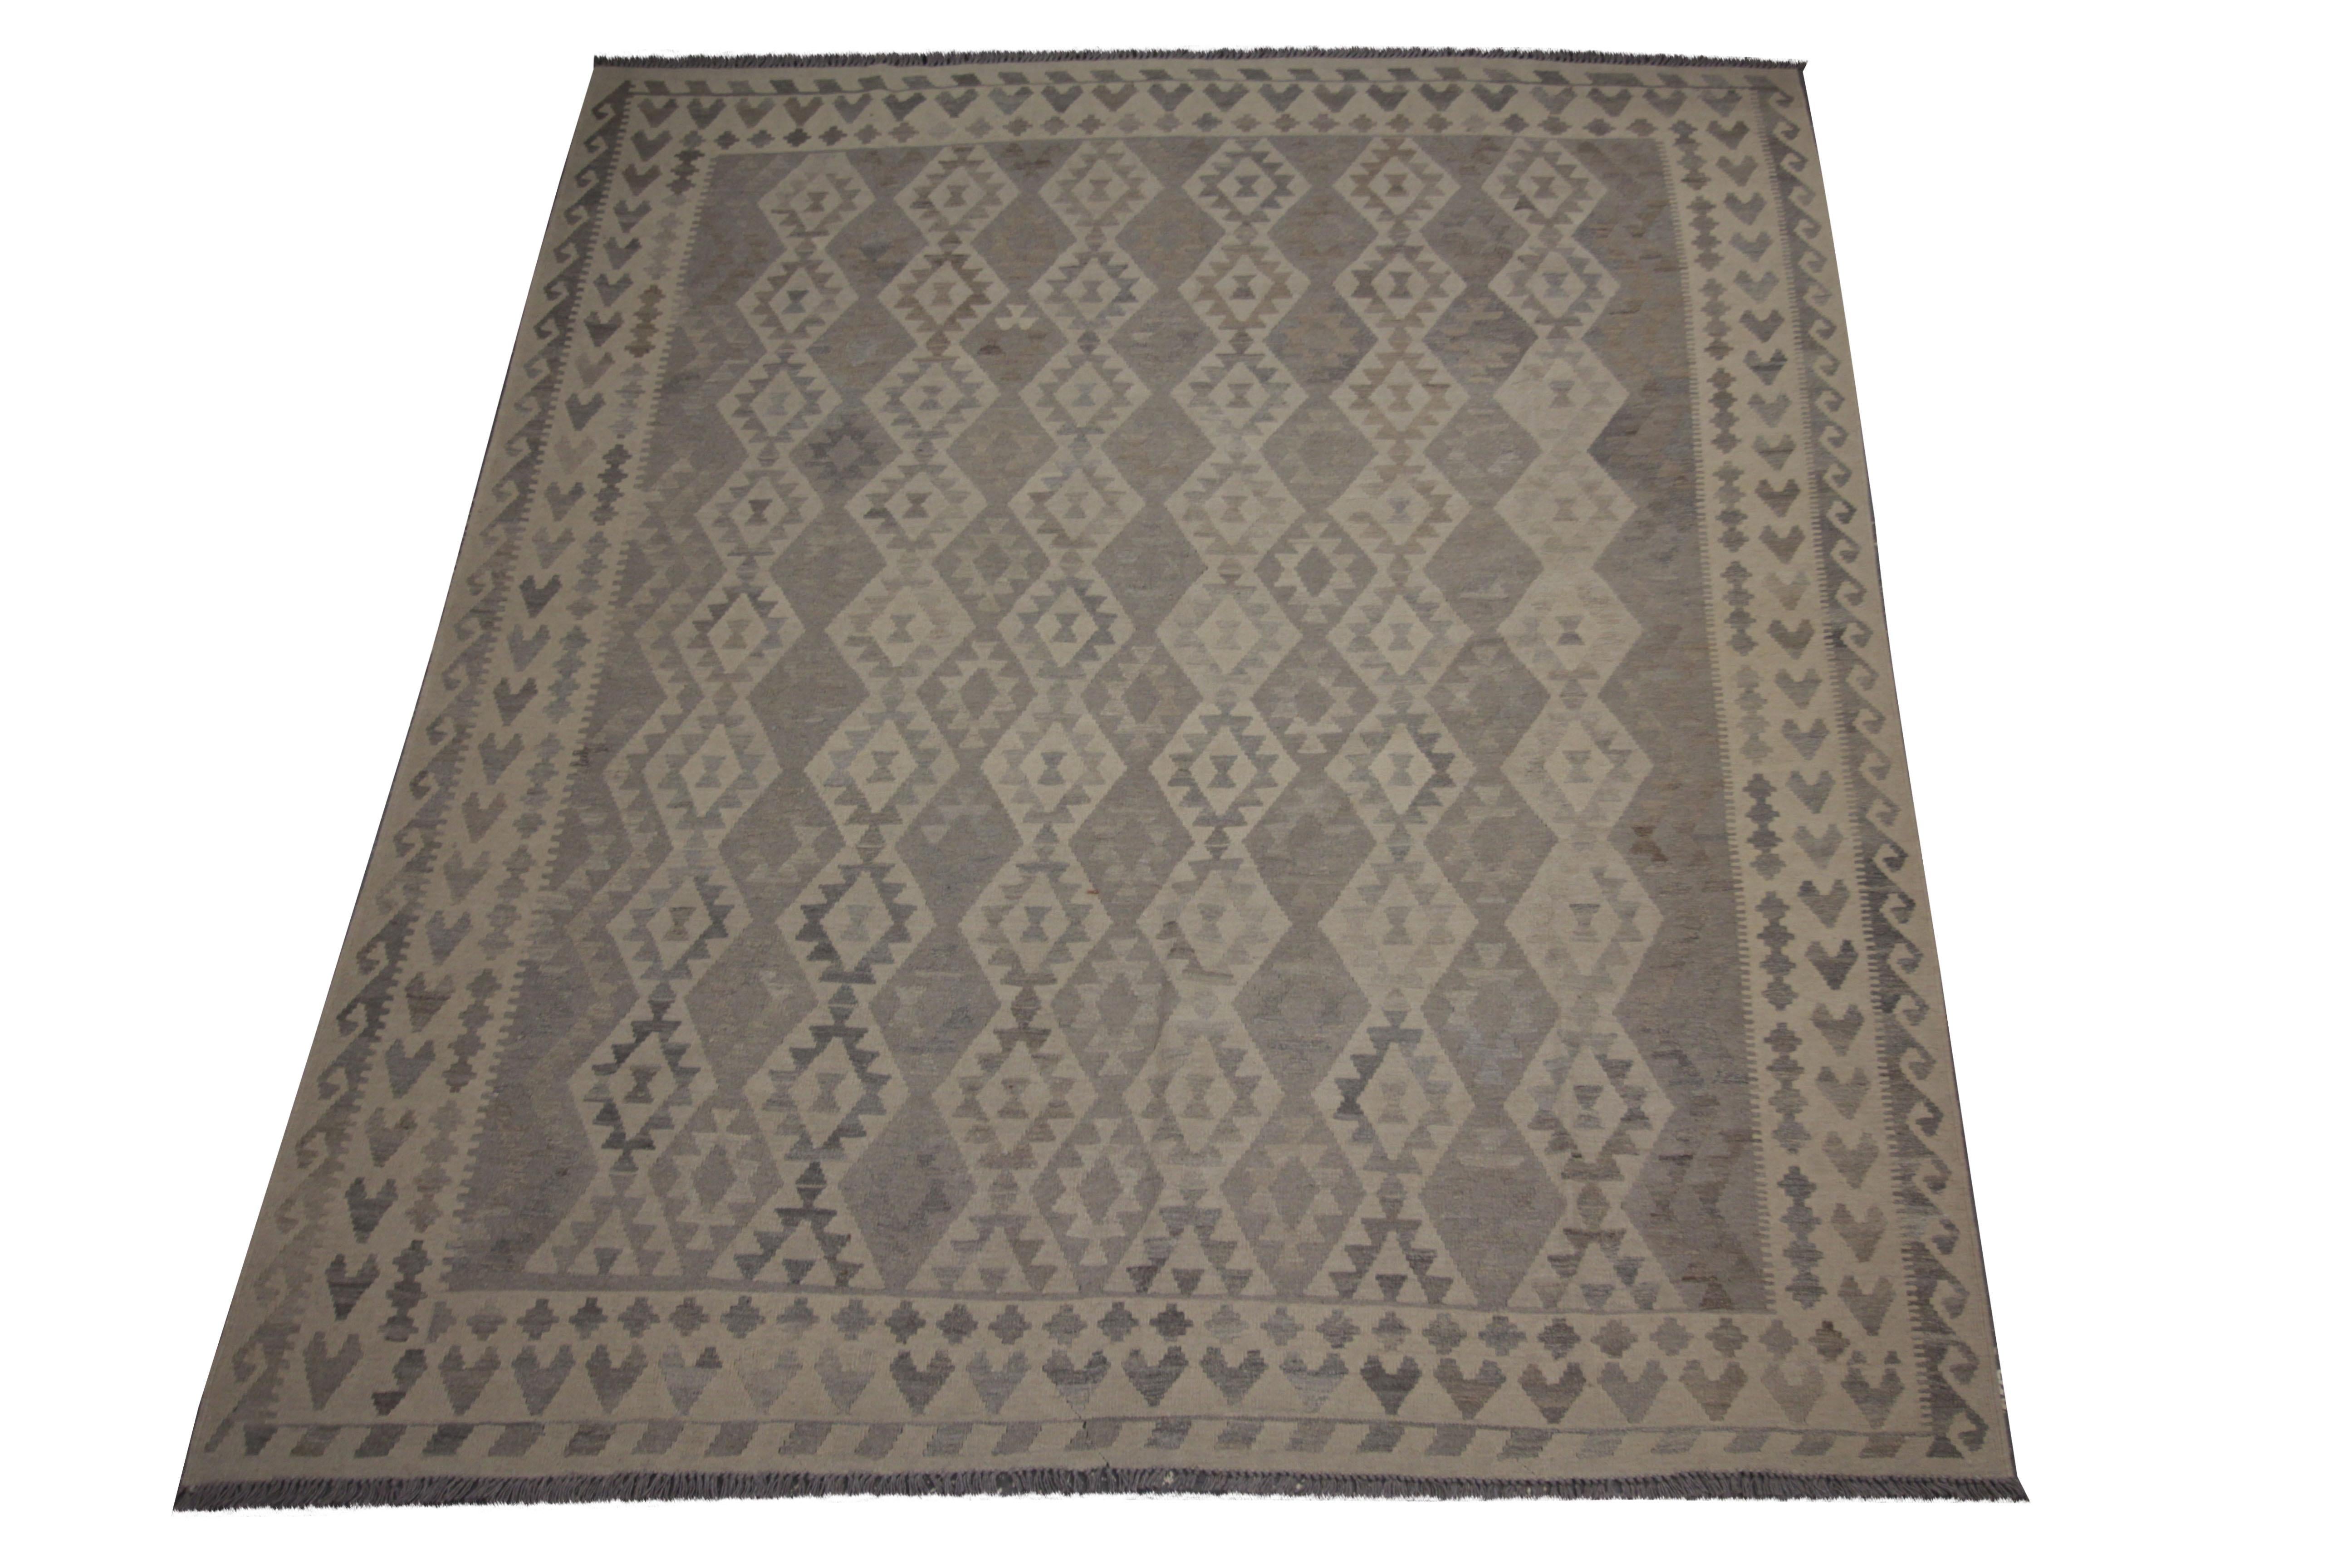 This fine wool rug was woven by hand in Afghanistan in the early late 20th early 21st century. The design has been woven with a traditional geometric pattern featuring diamond motifs woven in a repeating design. The colour palette makes it easily